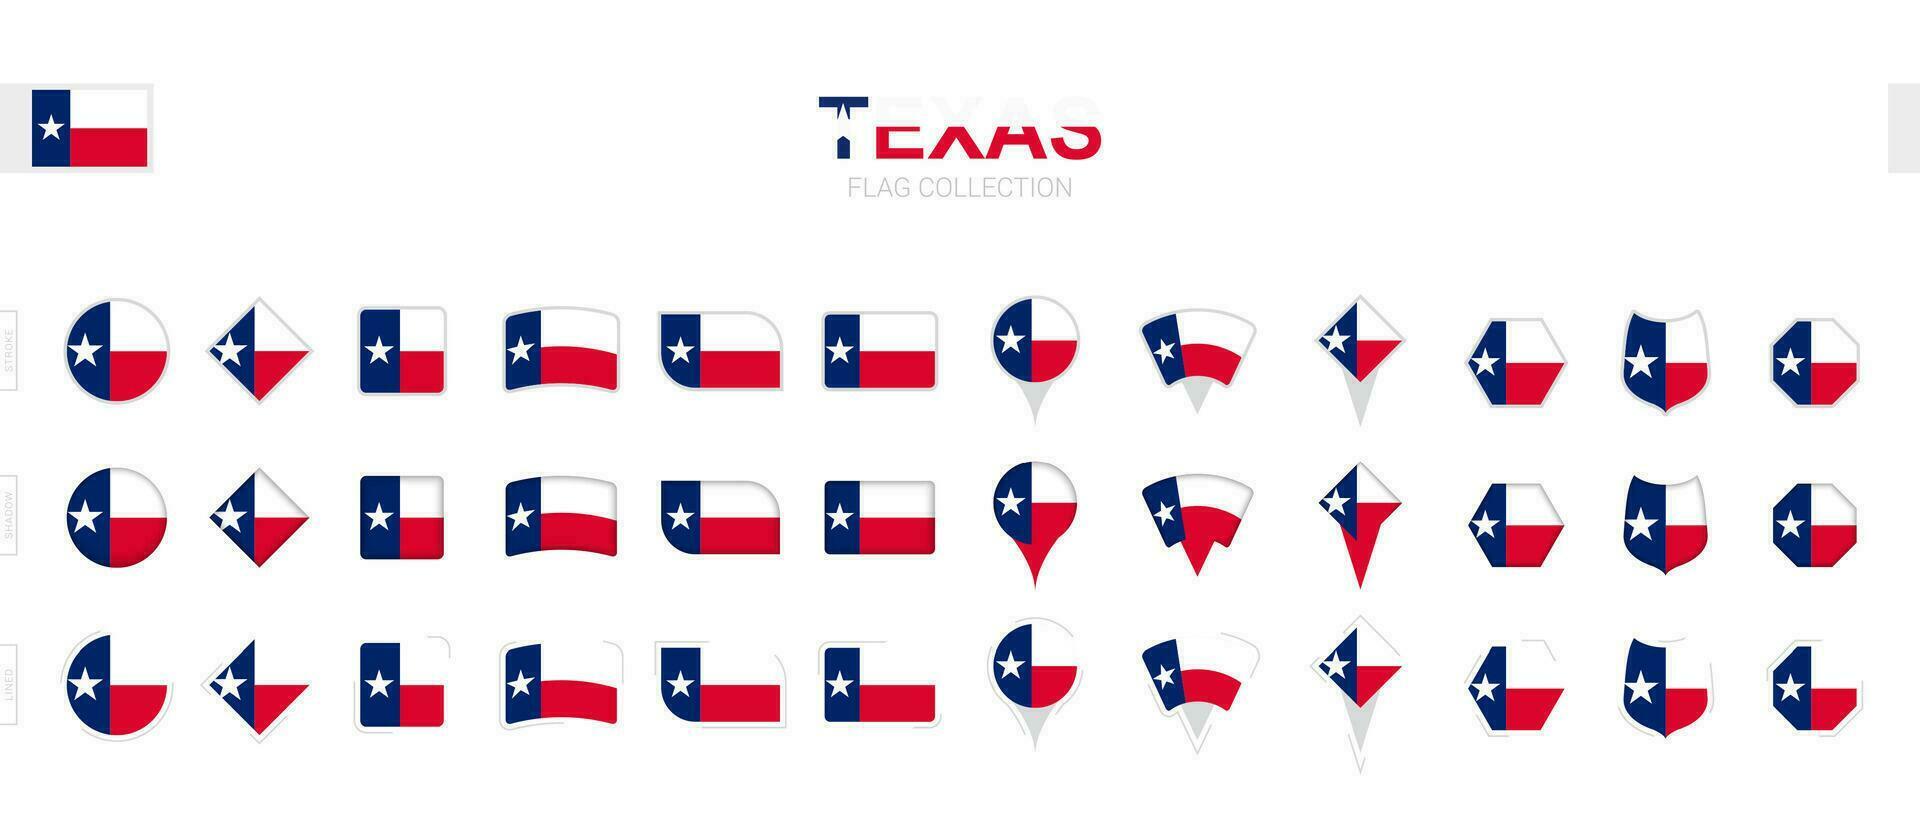 Large collection of Texas flags of various shapes and effects. vector